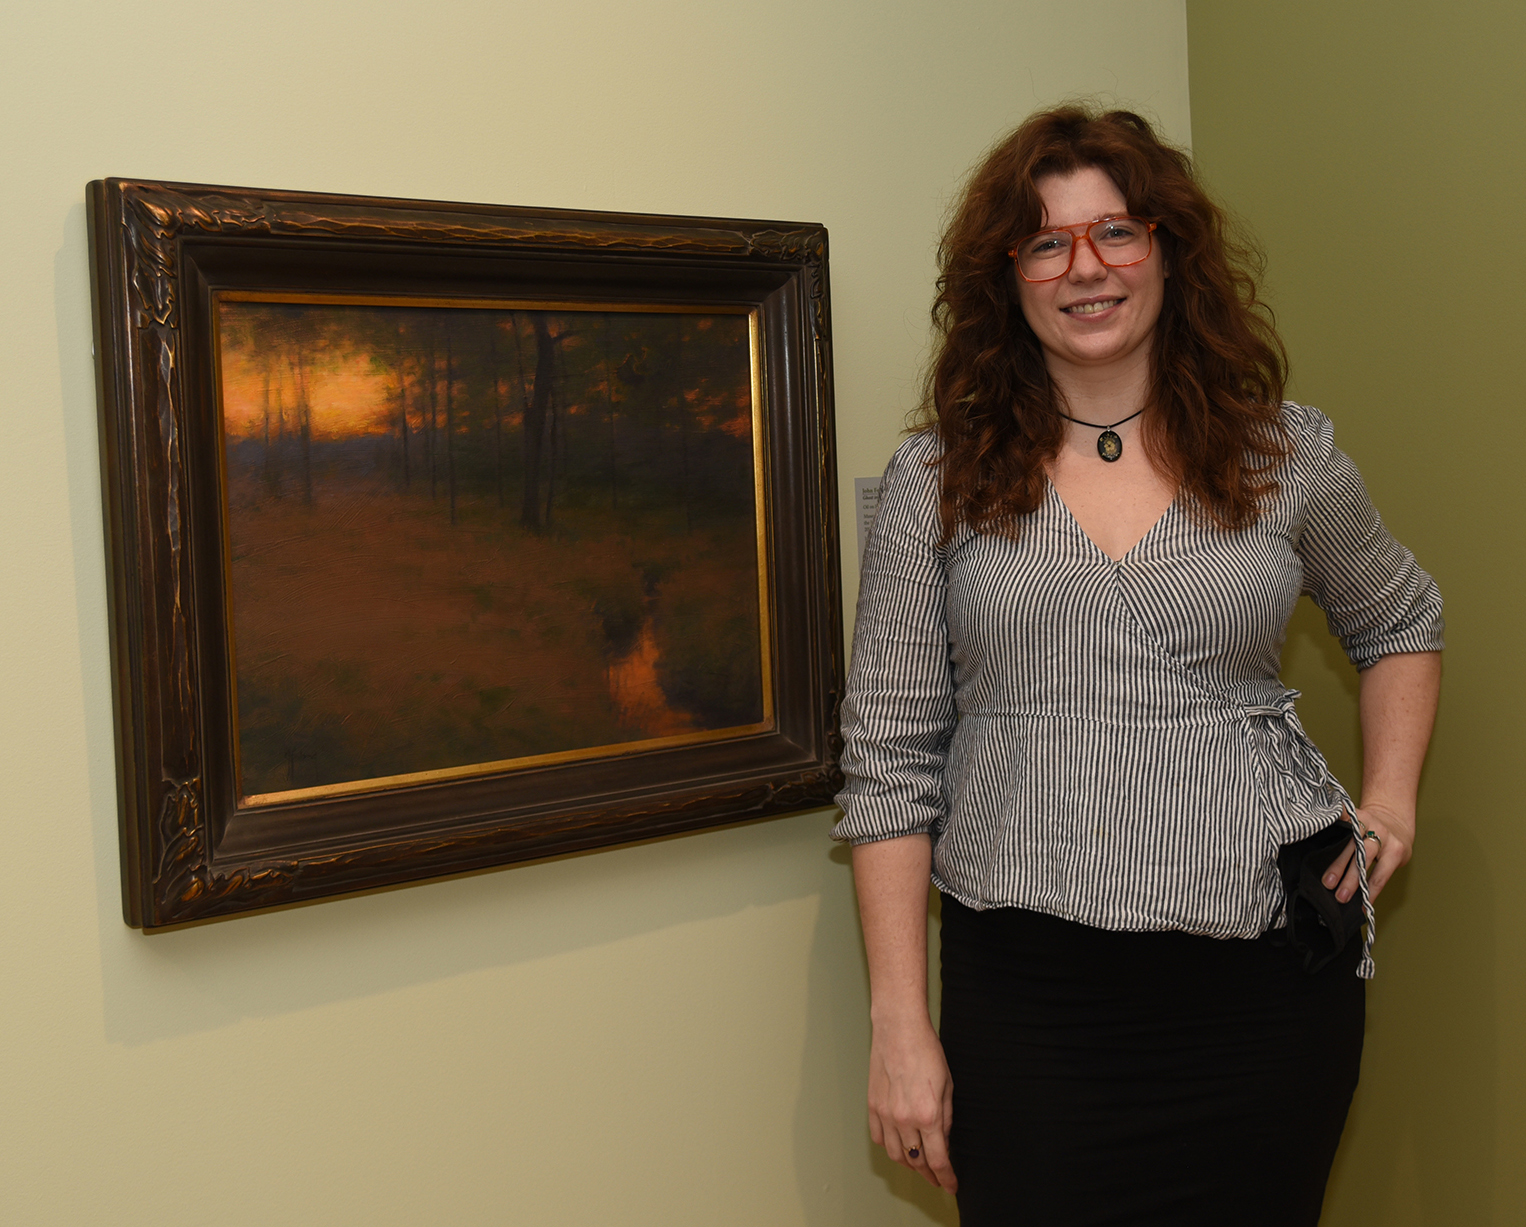 Woman stands next to a painting of a landscape at twilight.